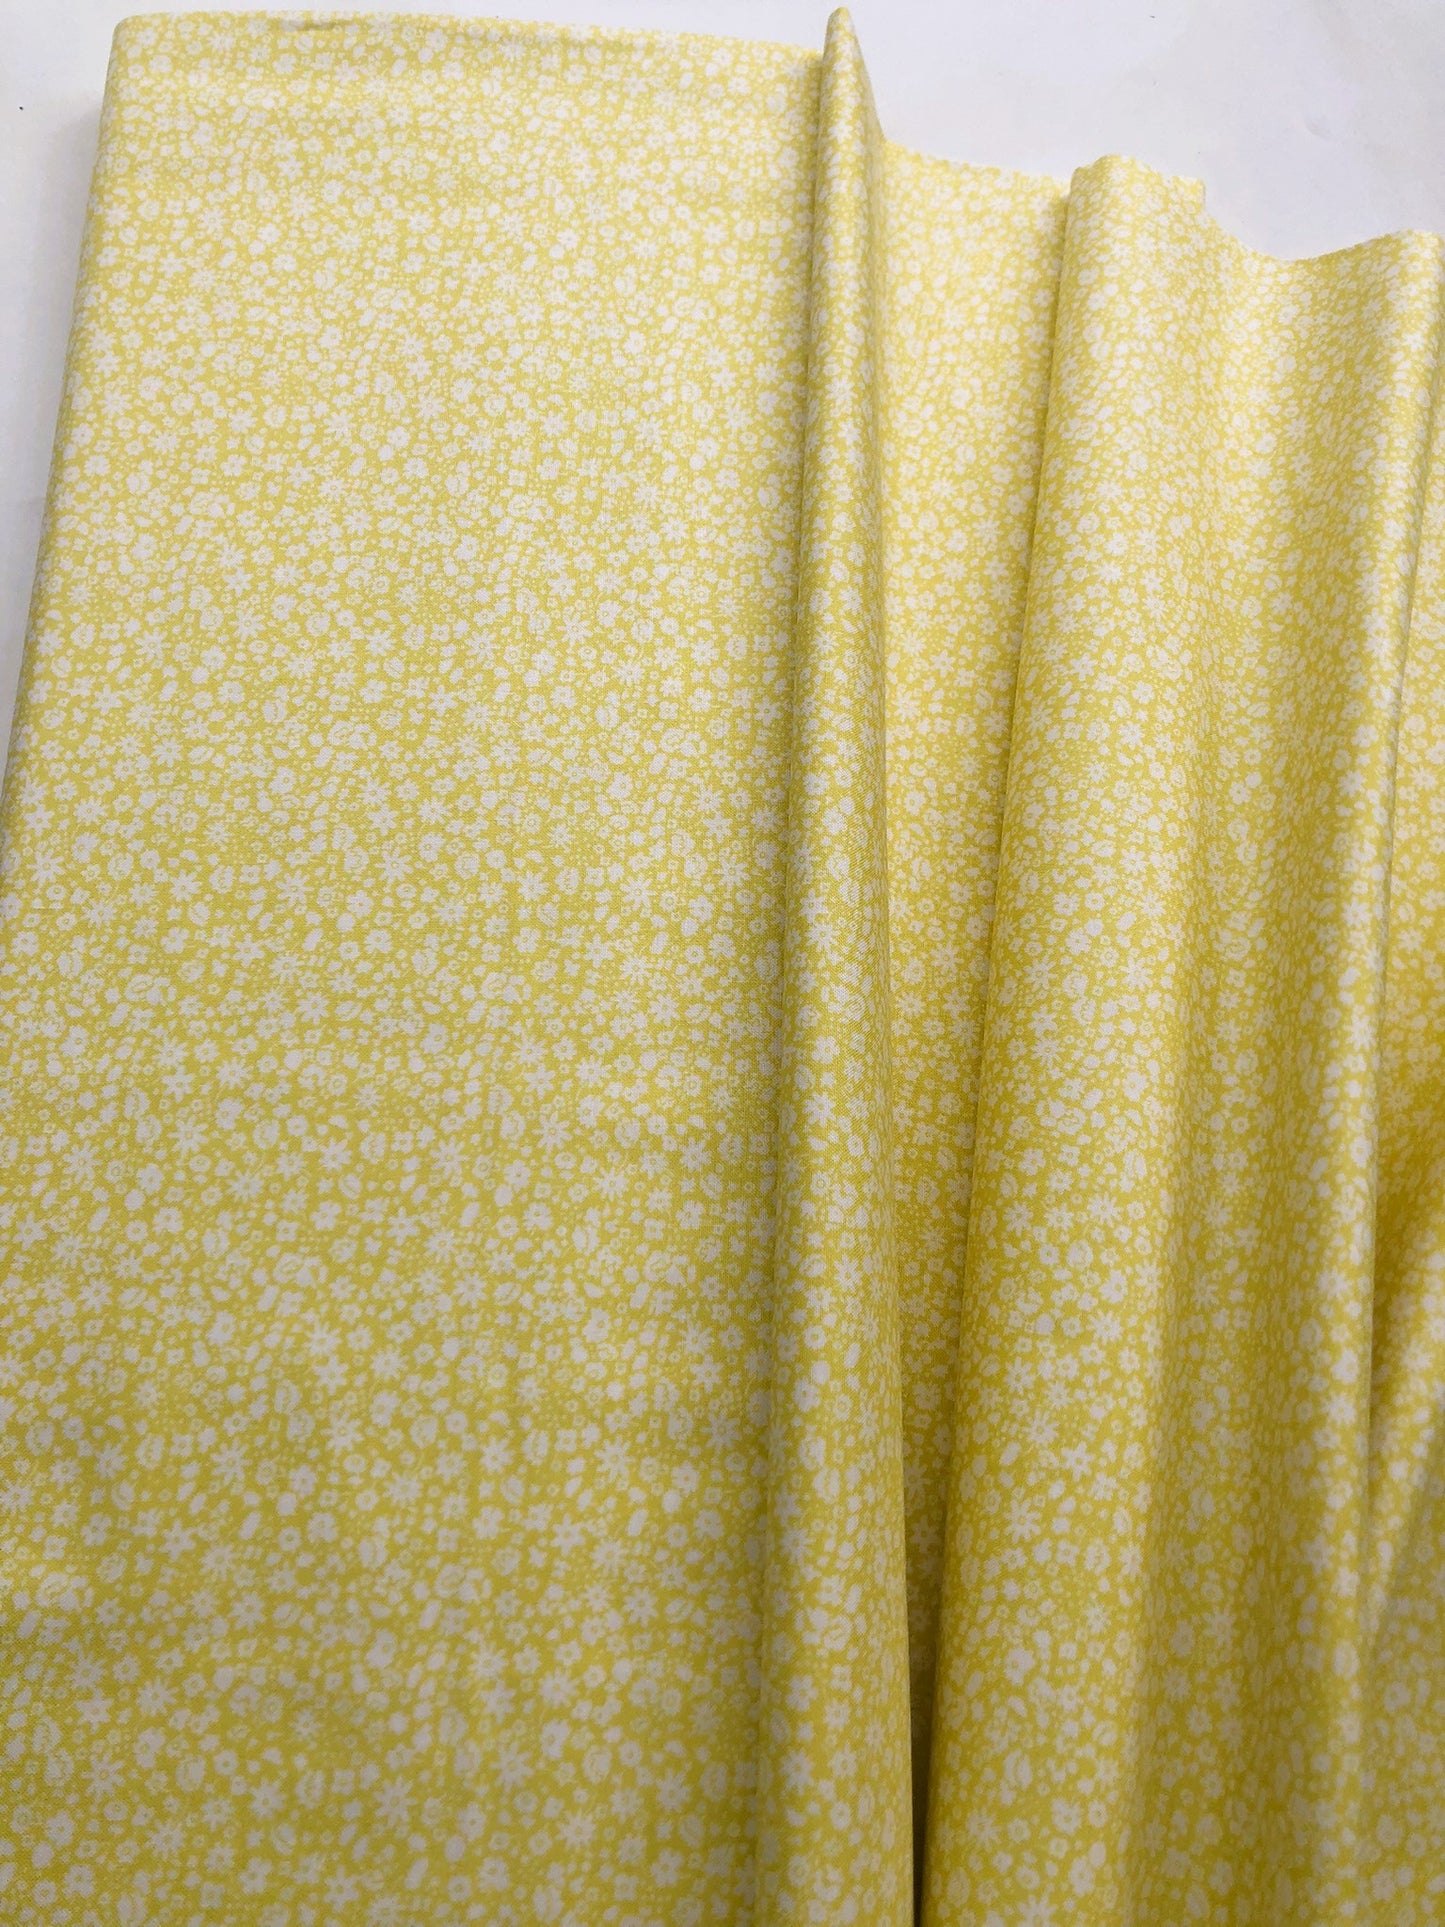 Liberty Fabric Carnaby Collection  - Yellow Bloomsbury Silhouette